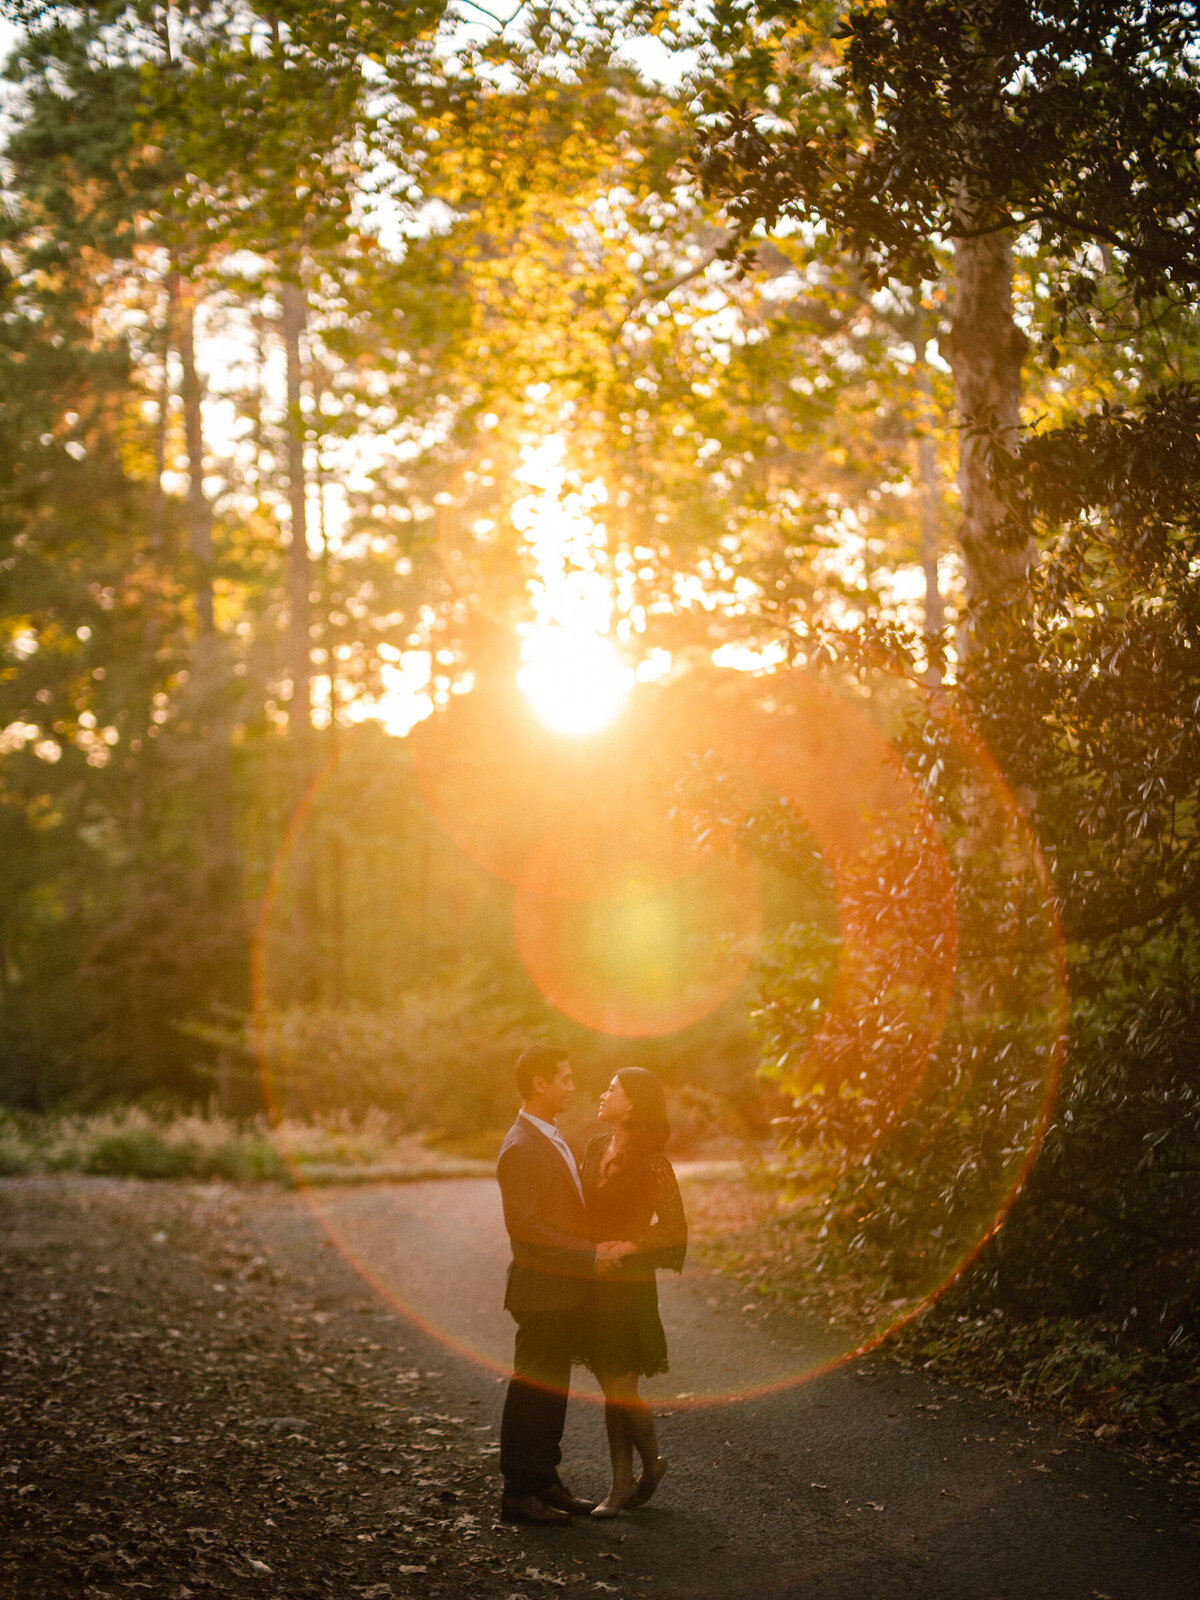 Couple in a forested path, enveloped by a warm sunset glow